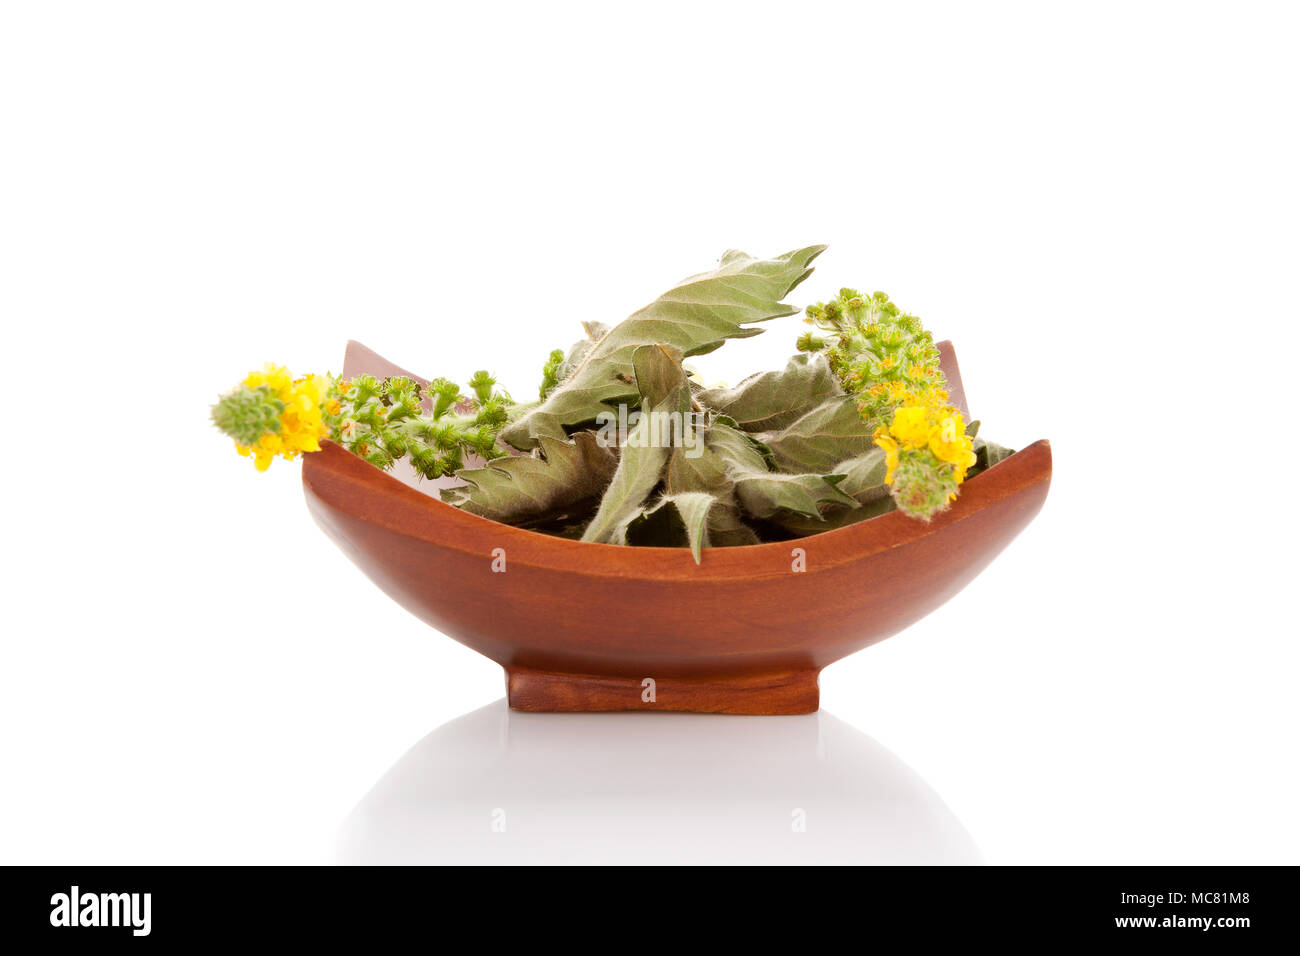 Common Agrimony fresh flower and dried leaf in wooden bowl isolated on white background. Medicinal plant remedy. Stock Photo